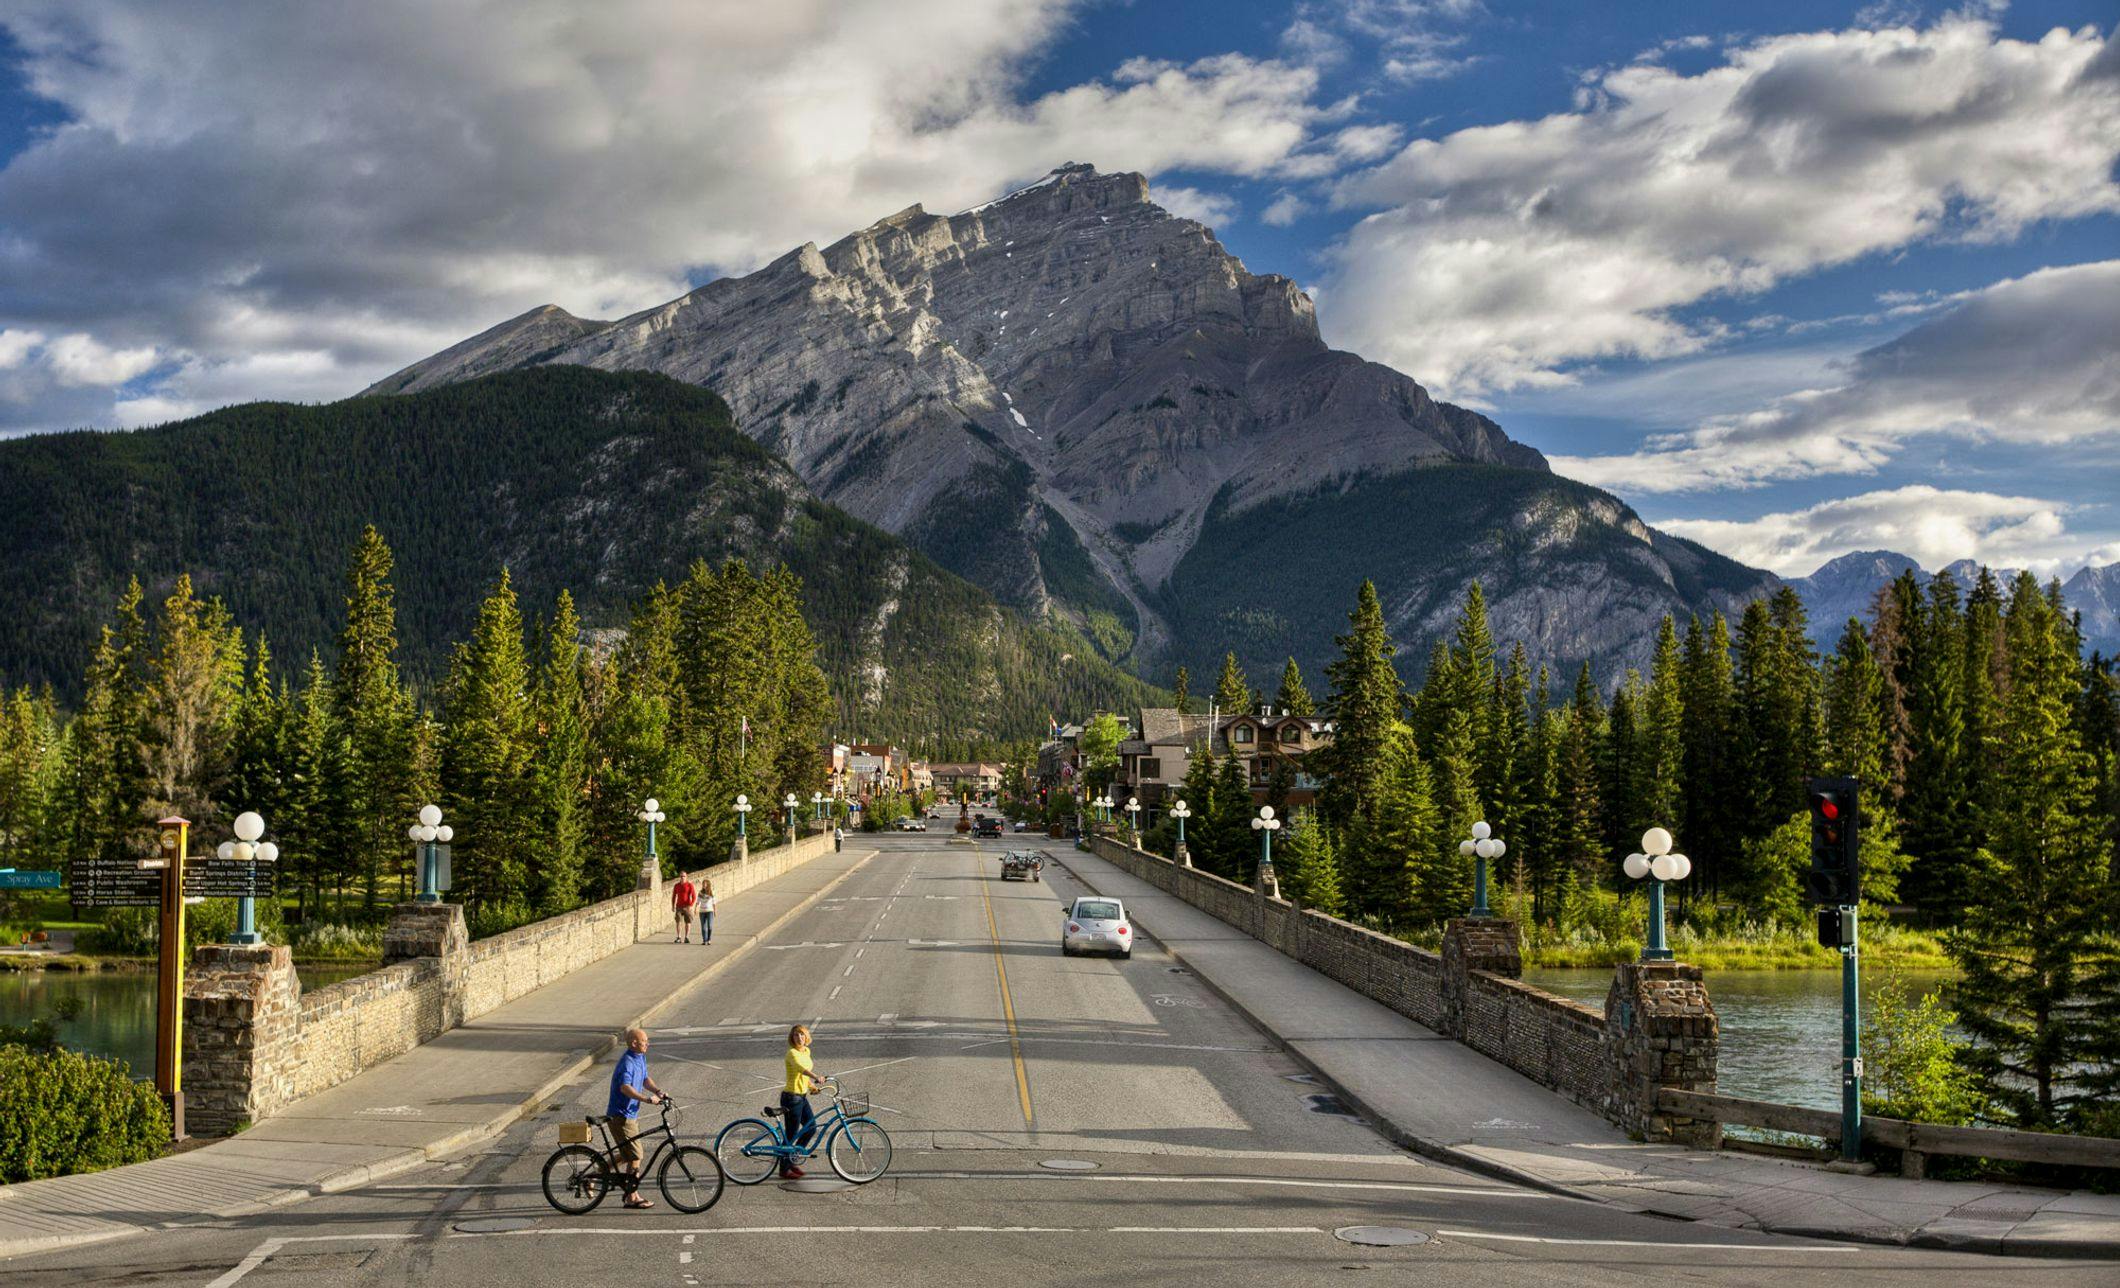 Mt. Rundle looming over the town of Banff